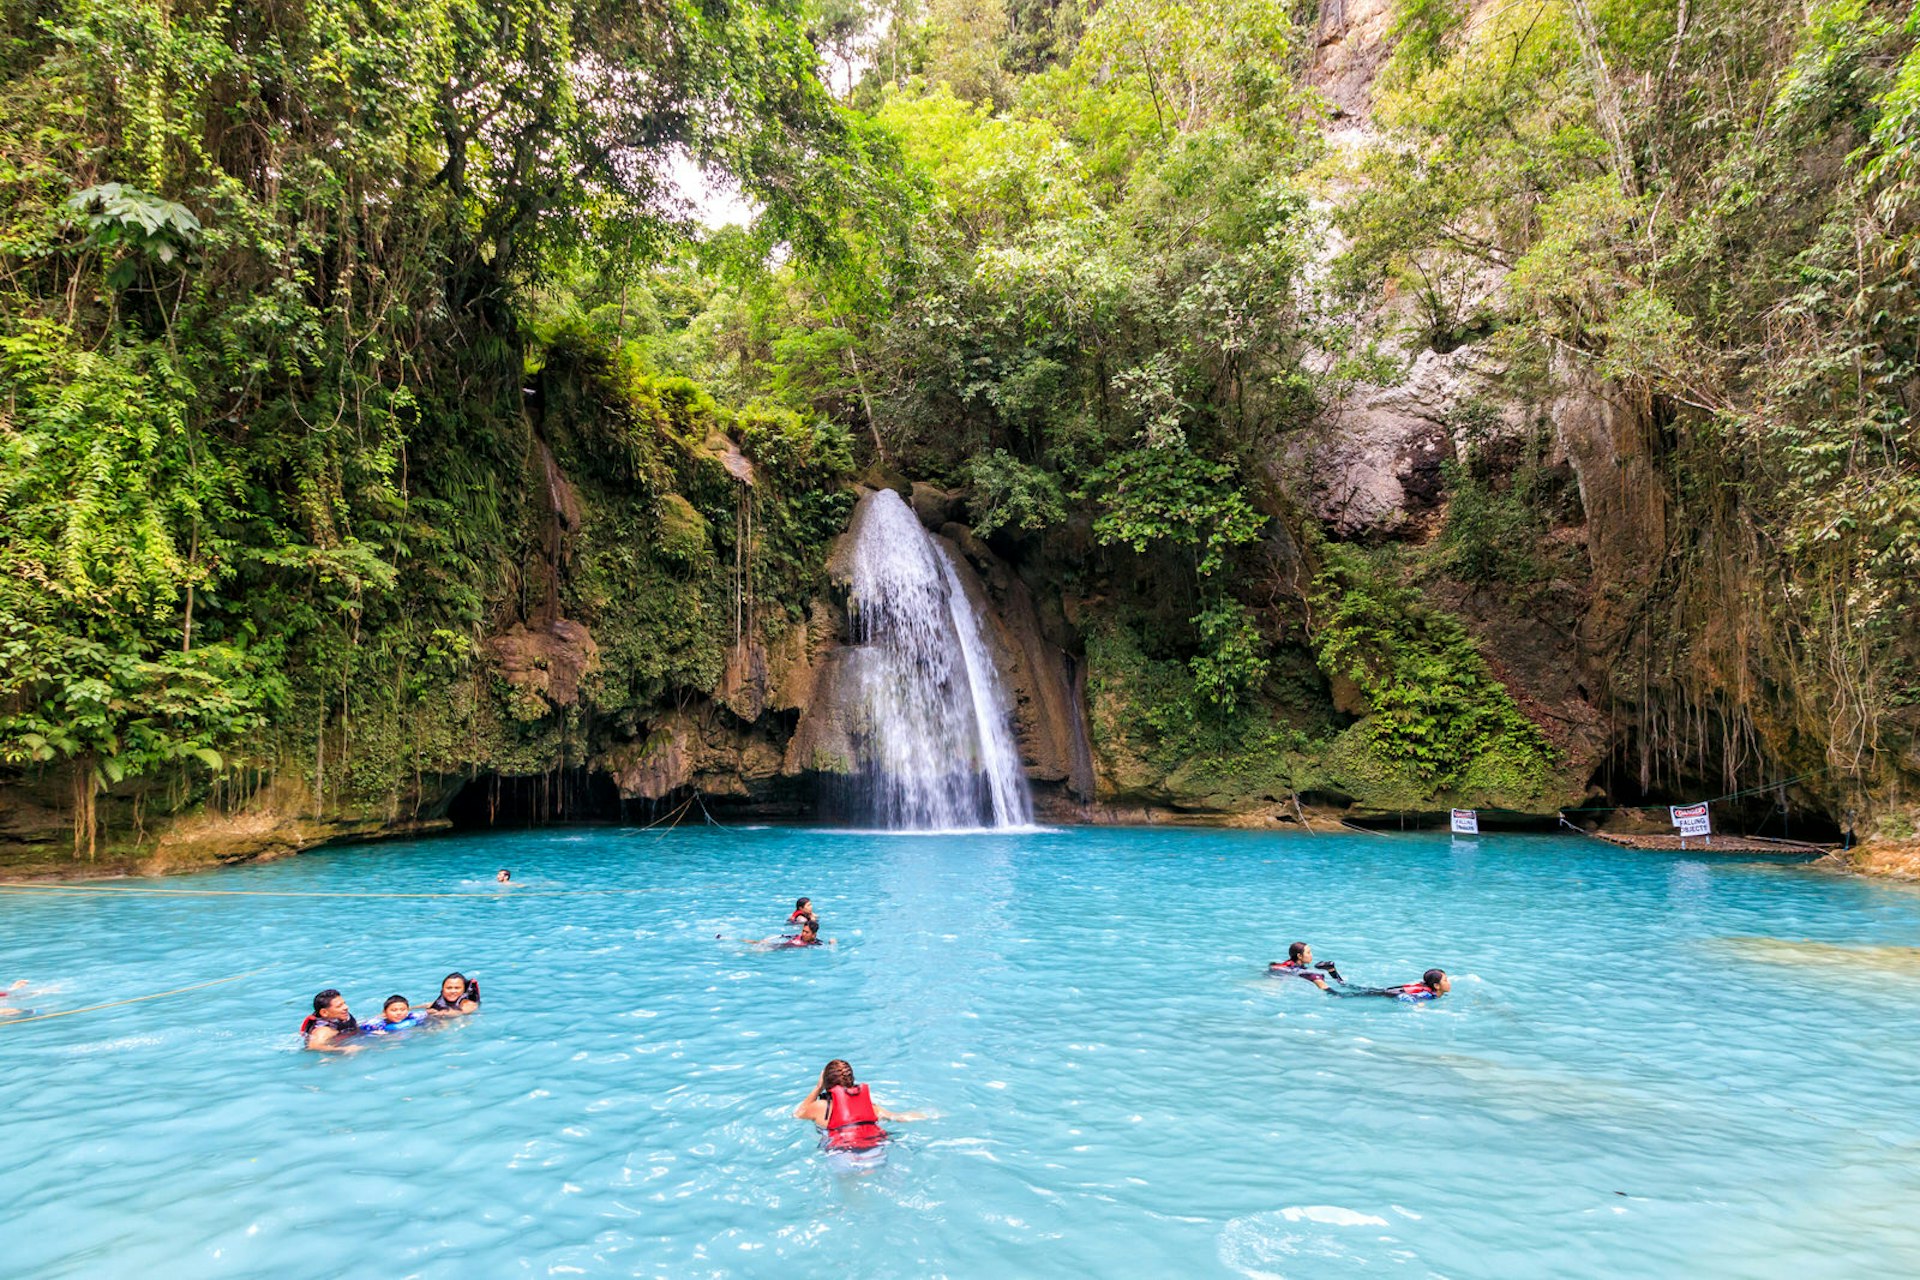 A shot of the blue pool at the bottom of Kawasan Falls, Cebu with a few people swimming in it. The blue waters are surrounded by lush greenery and we can also see the small waterfall. 